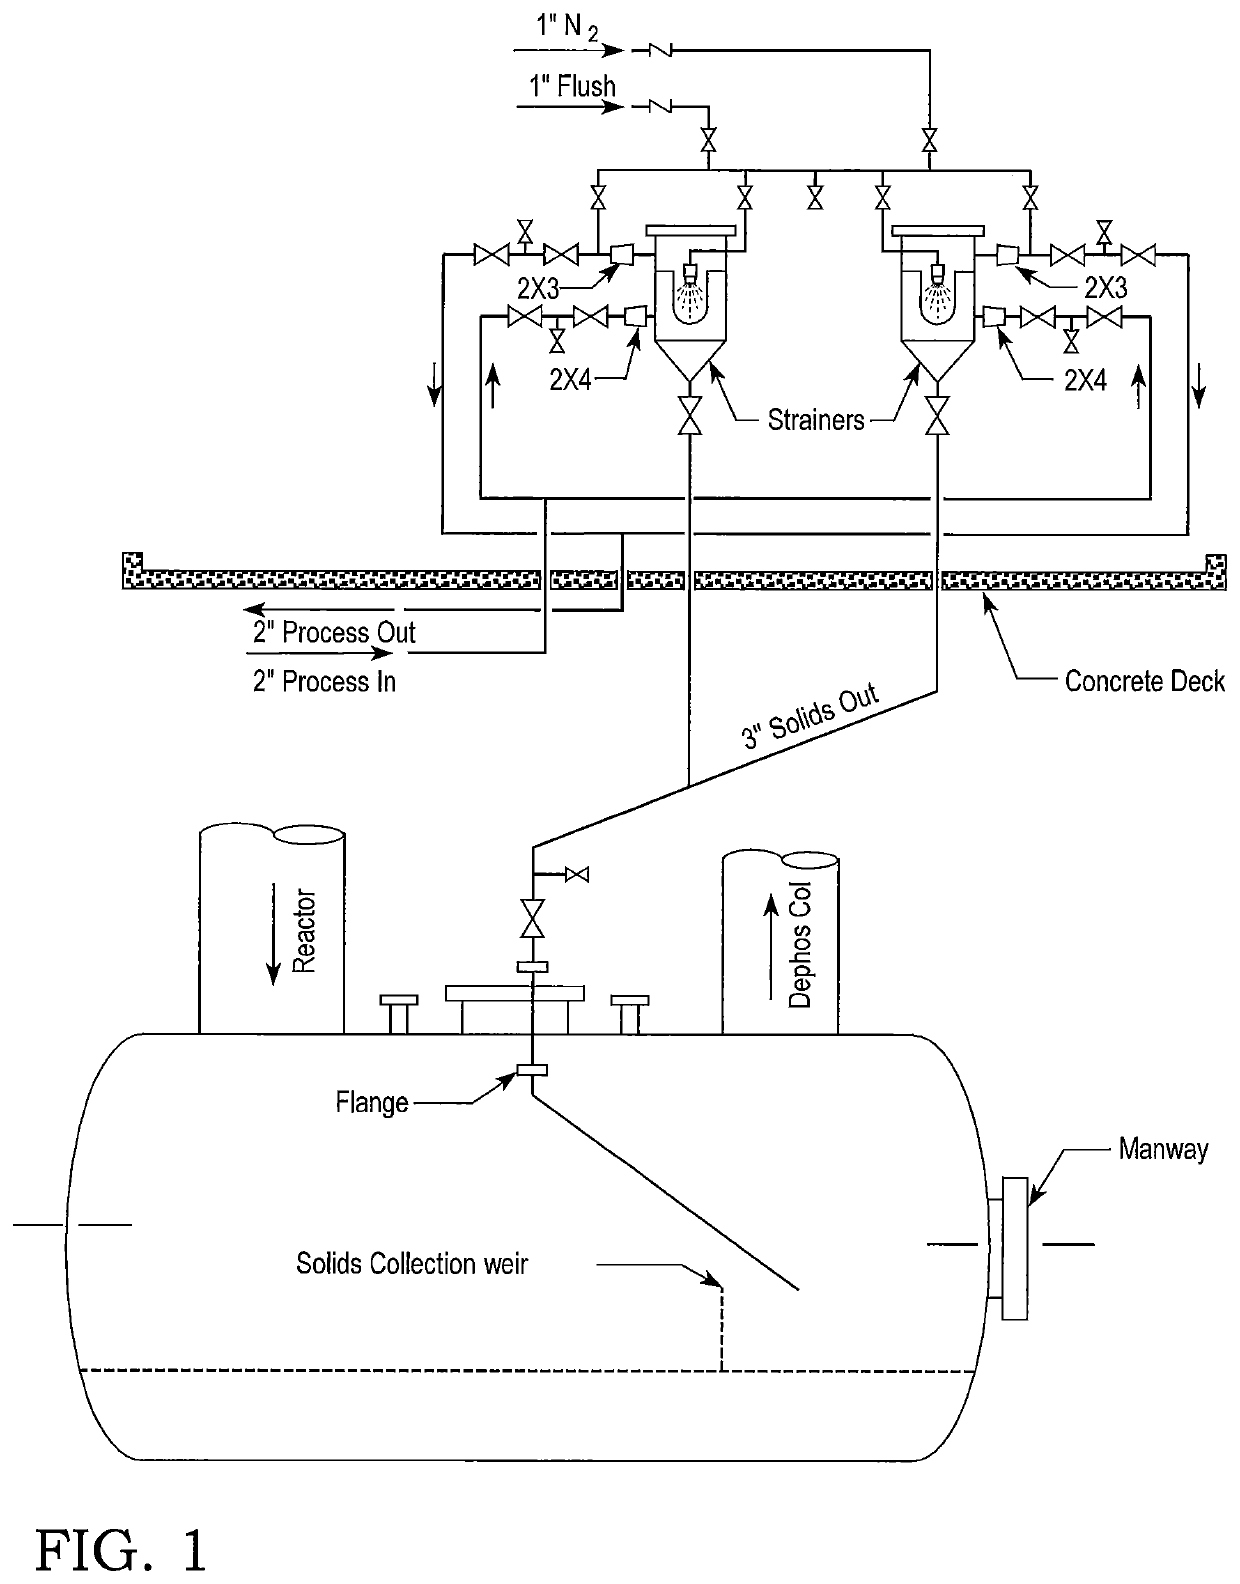 Process for the continual inline filtration of a process stream